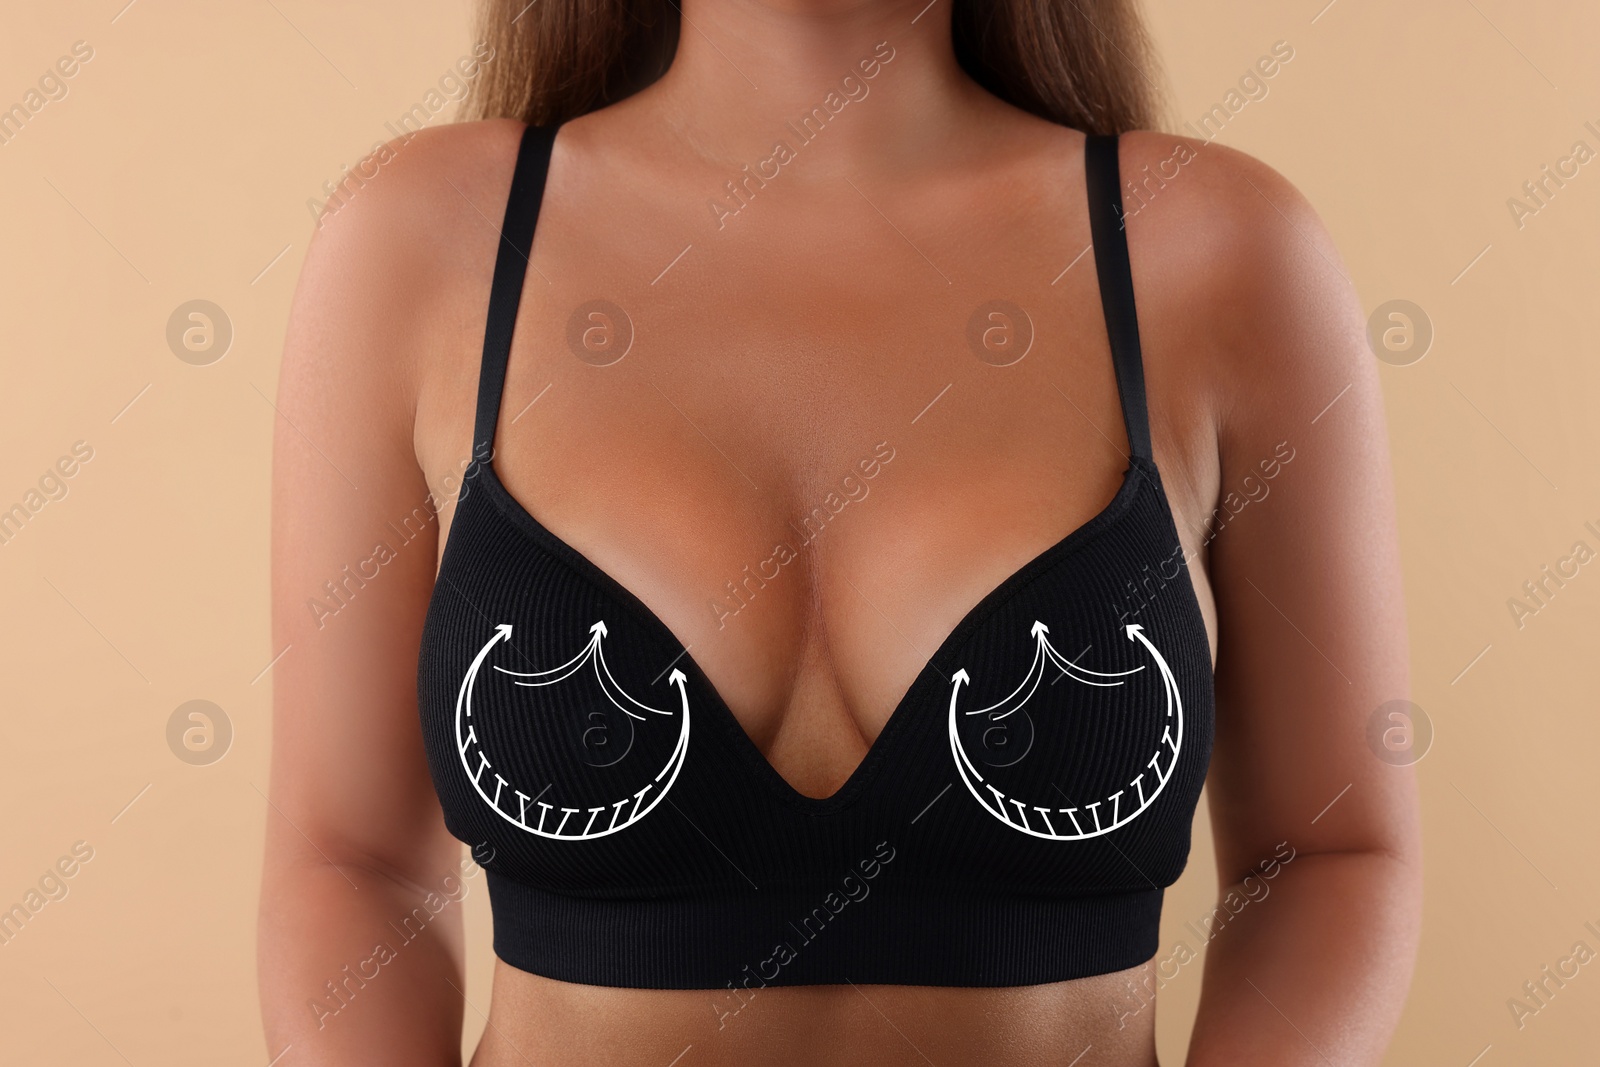 Image of Breast surgery. Woman with markings on bra against beige background, closeup